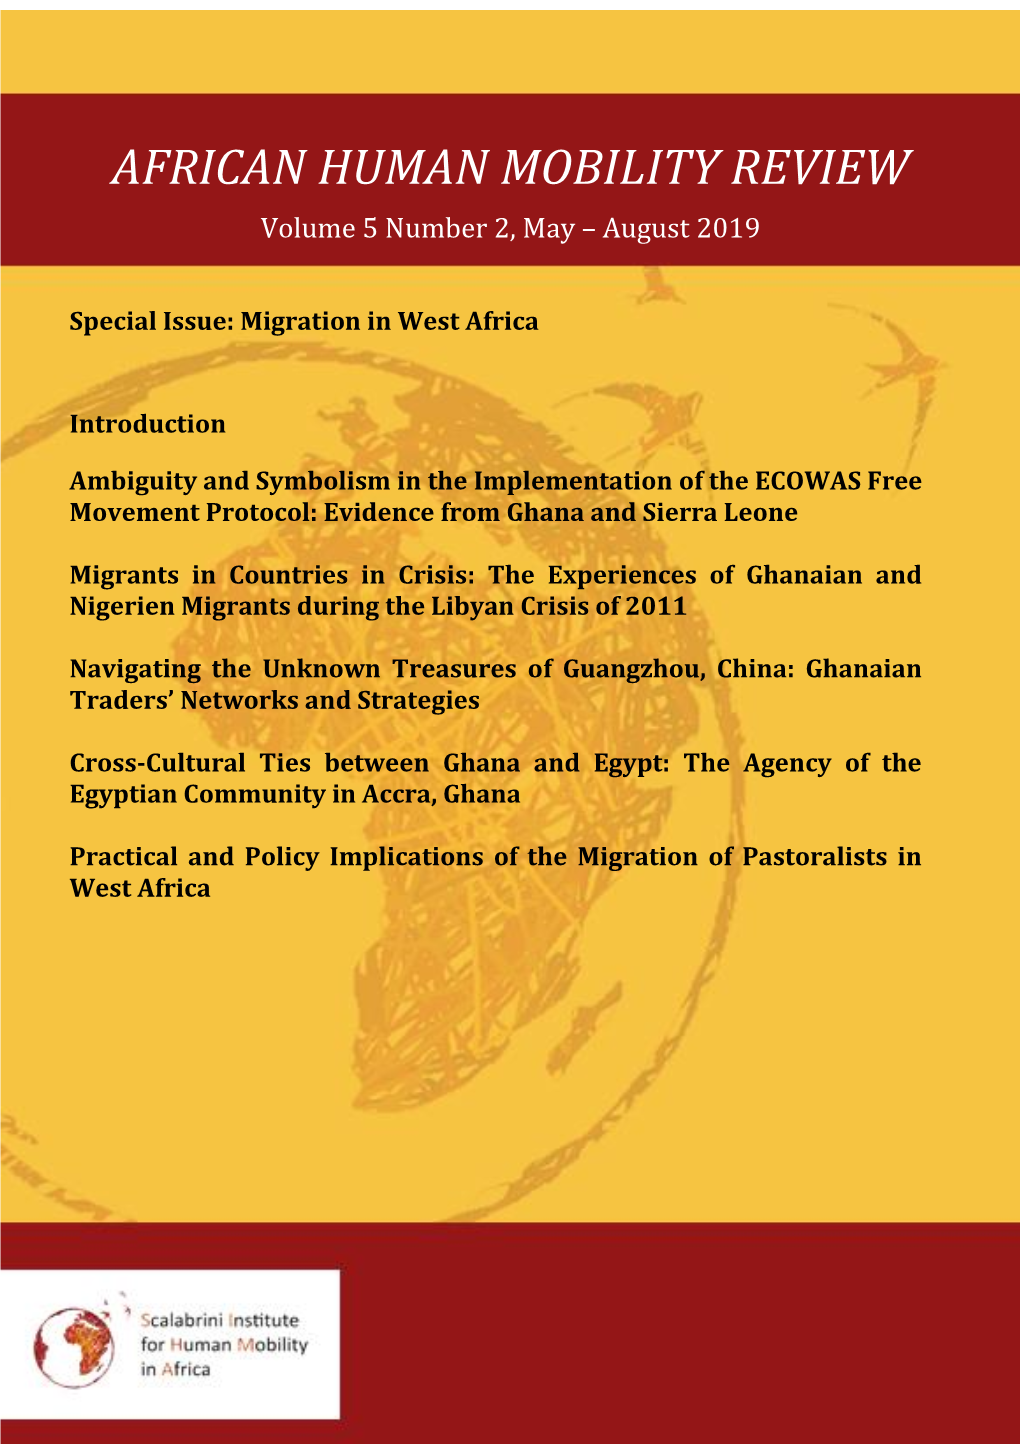 AFRICAN HUMAN MOBILITY REVIEW Volume 5 Number 2, May – August 2019